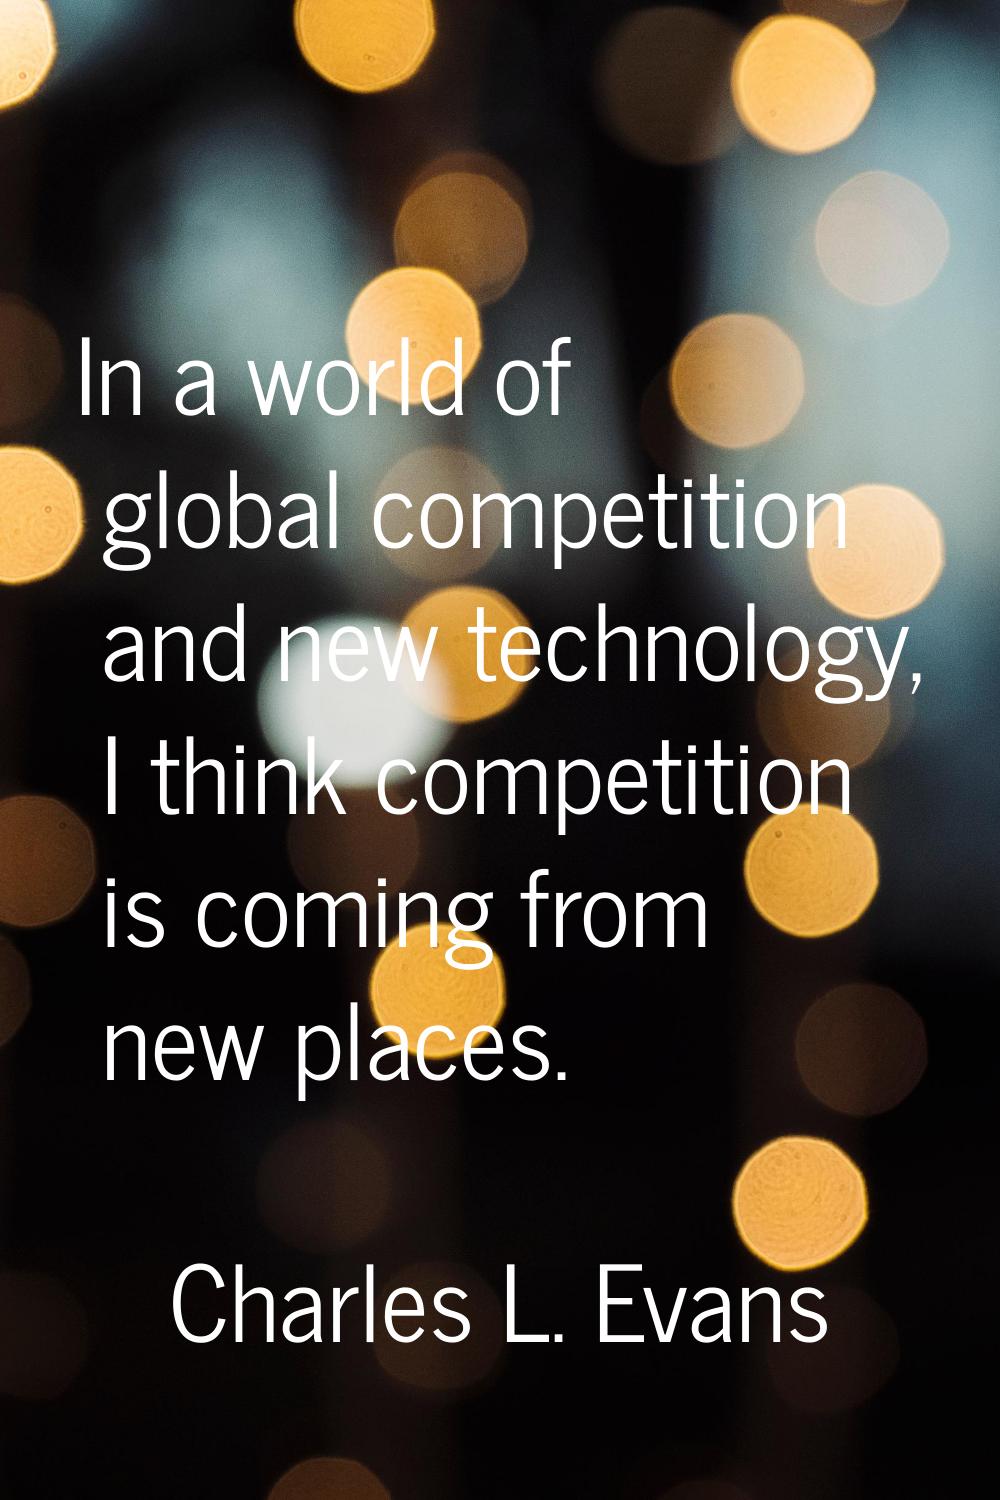 In a world of global competition and new technology, I think competition is coming from new places.